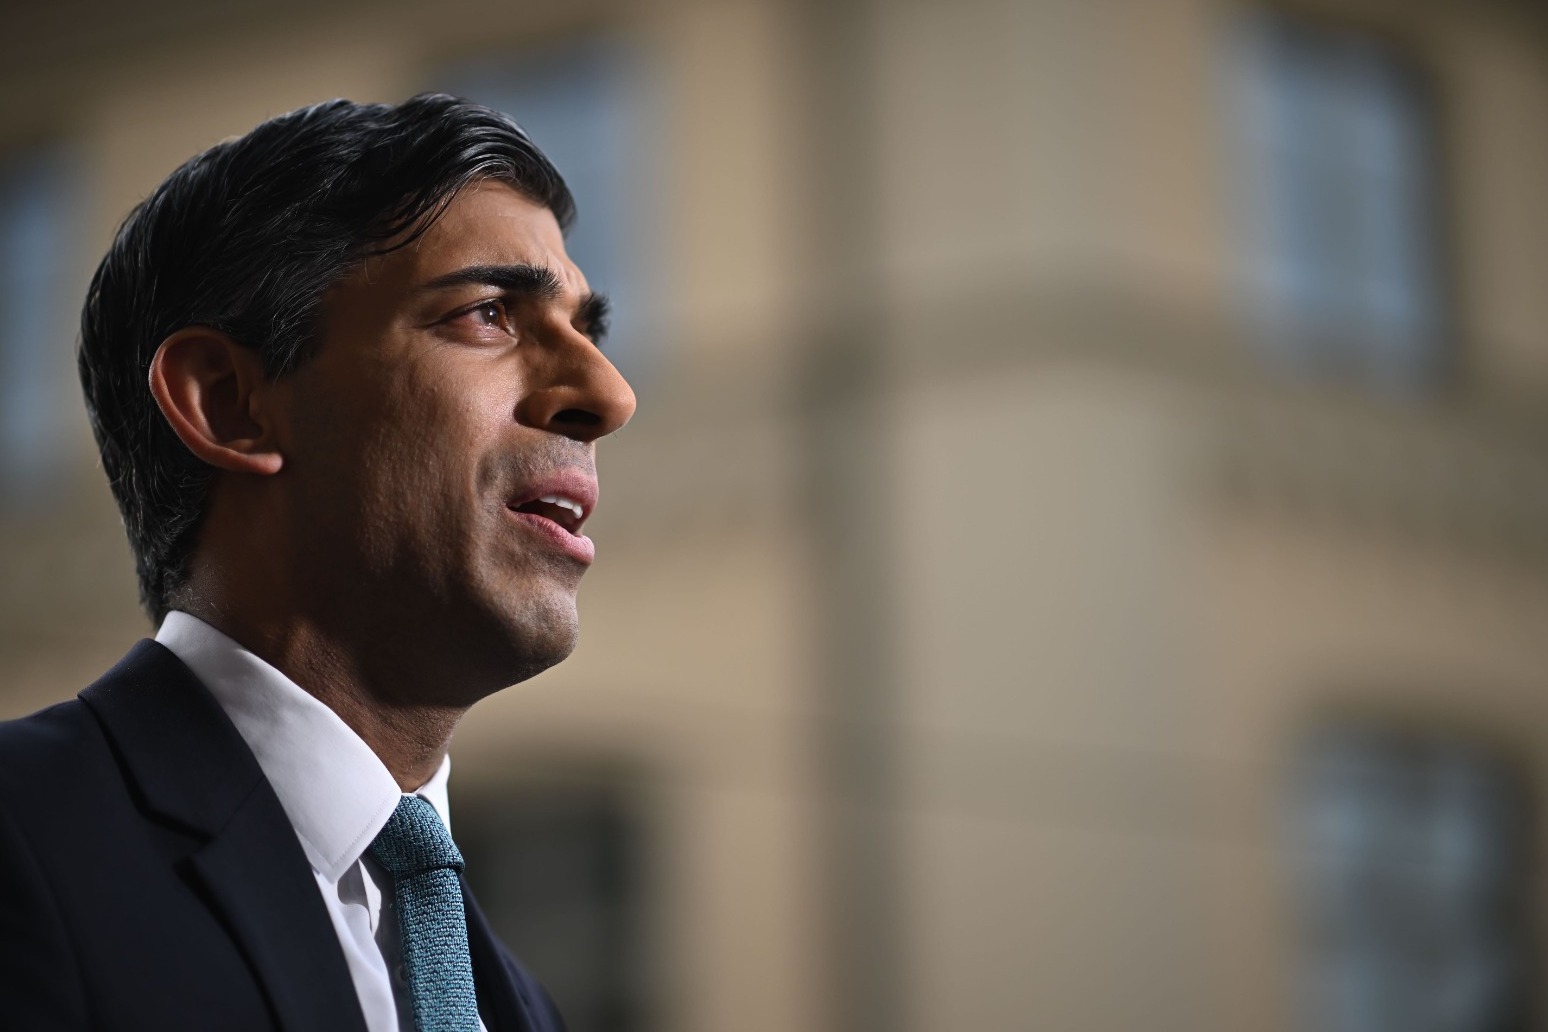 Northern Ireland Protocol deal ‘by no means done’, says Rishi Sunak 